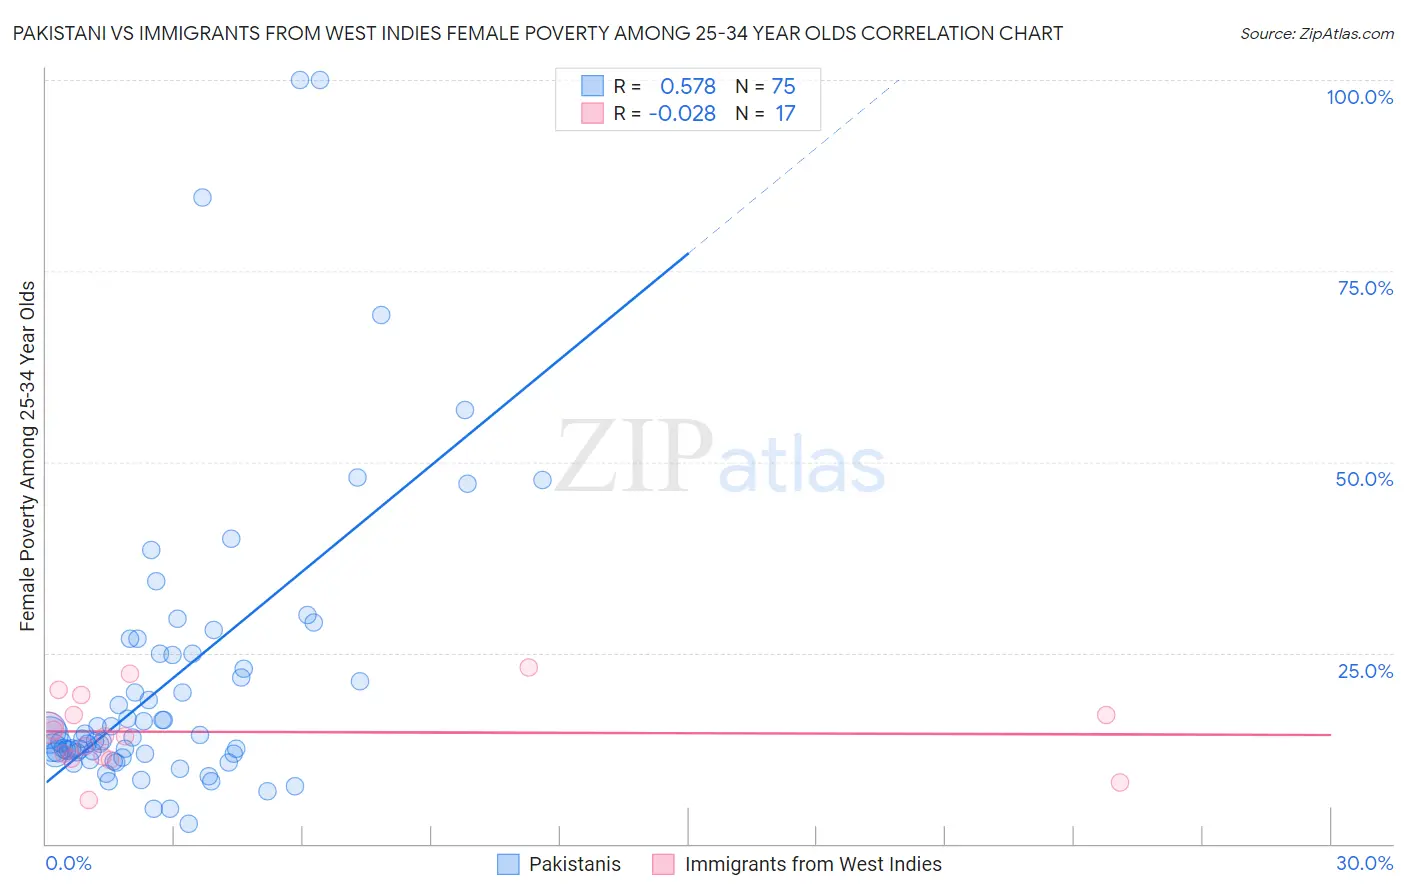 Pakistani vs Immigrants from West Indies Female Poverty Among 25-34 Year Olds